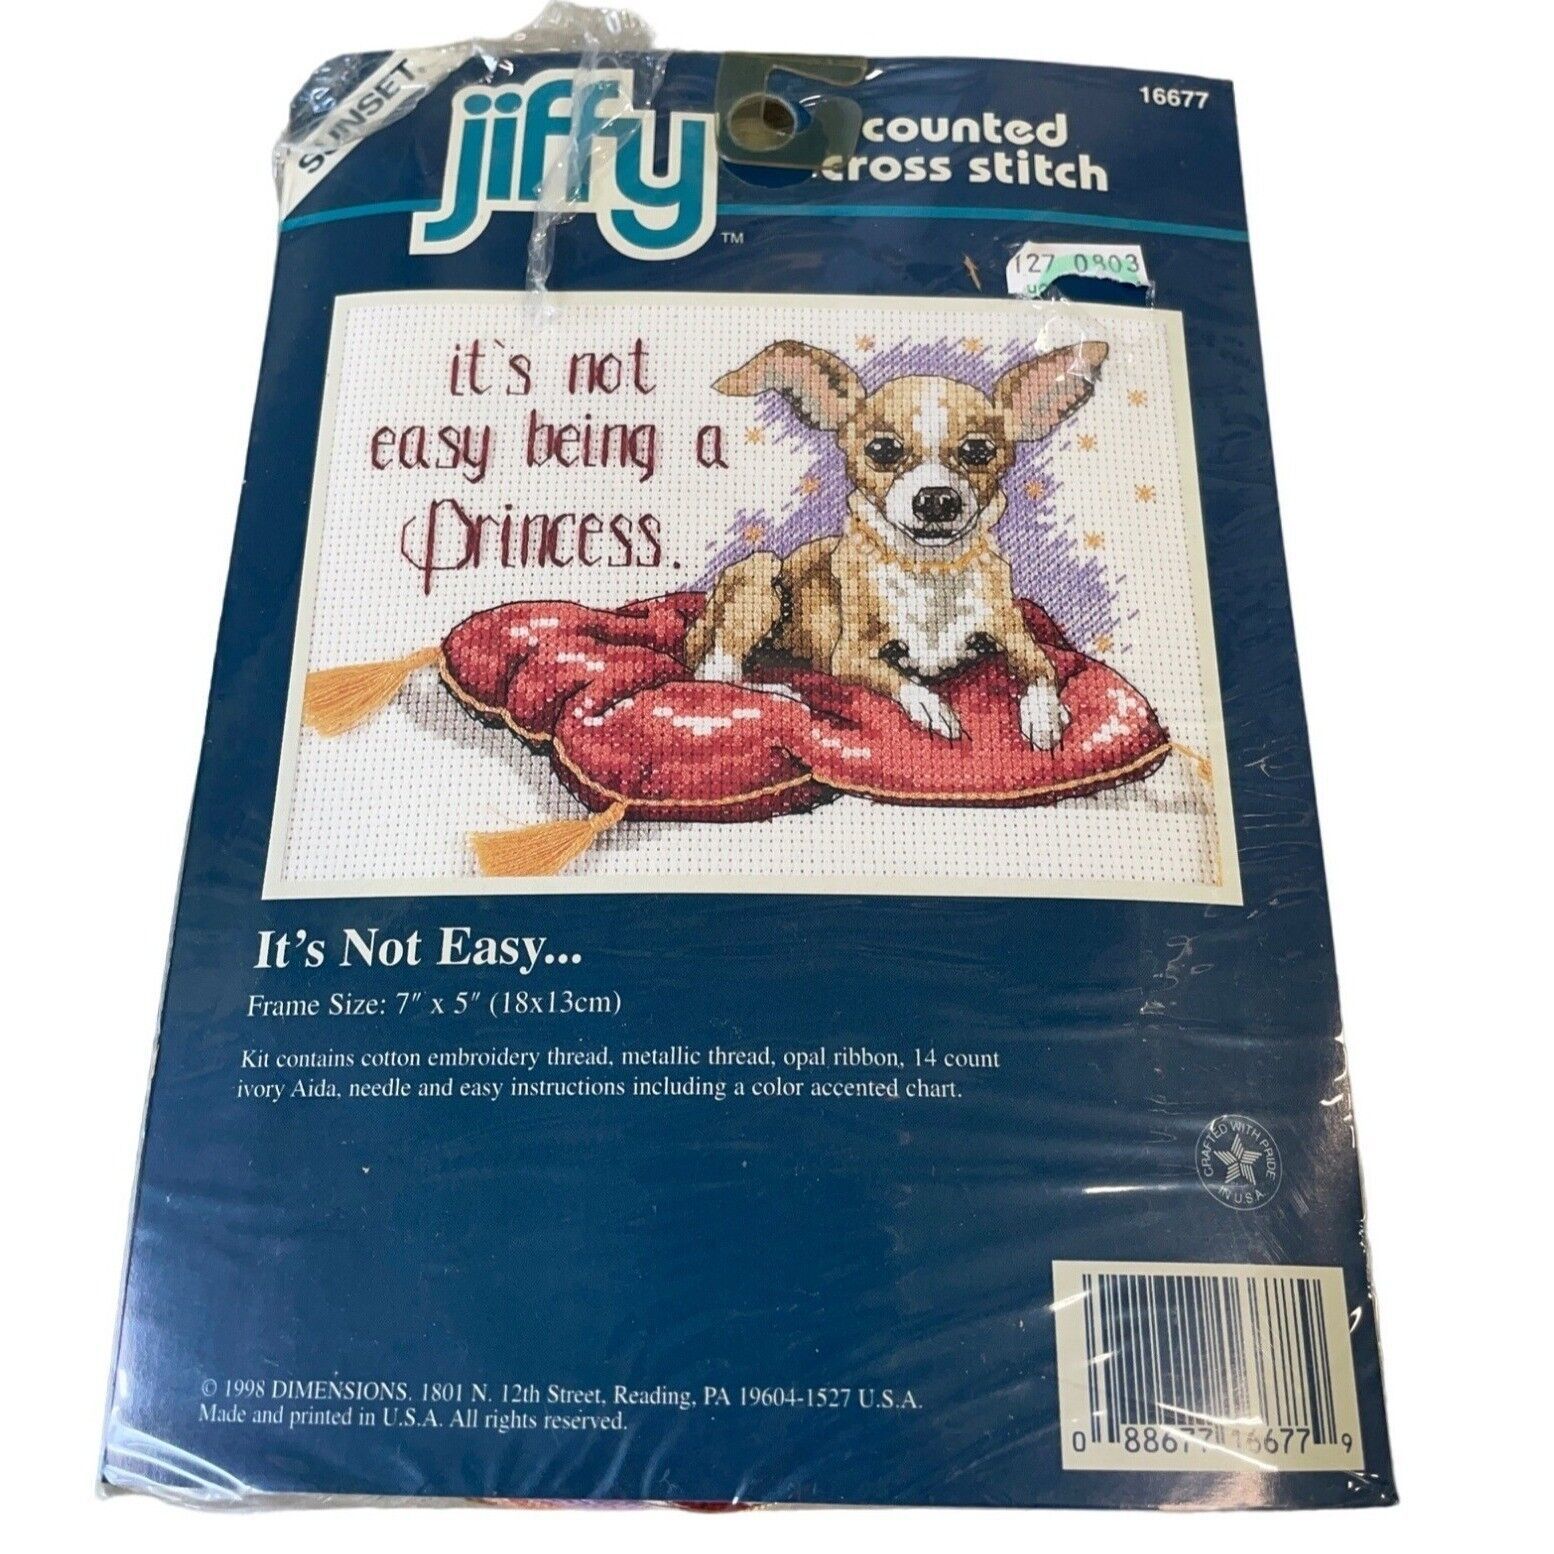 Sunset Jiffy Counted Cross Stitch Kit “It’s Not Easy Being a Princess" #16677 - $11.69